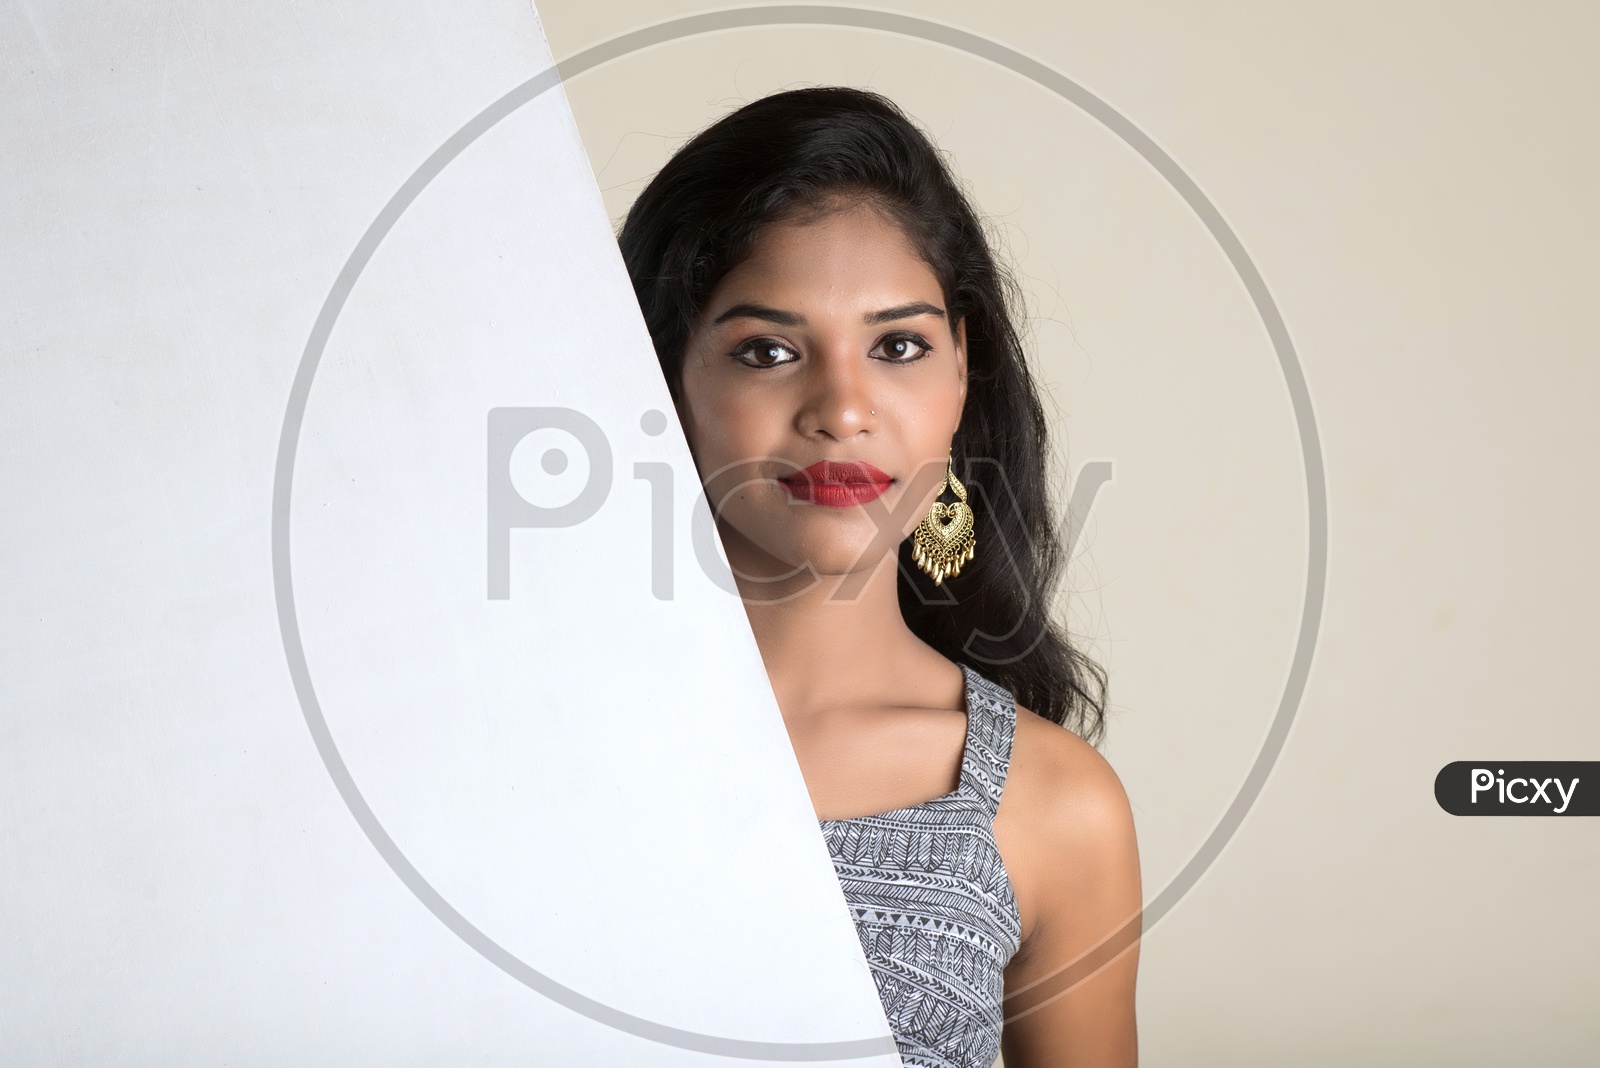 Indian woman holding an empty white board